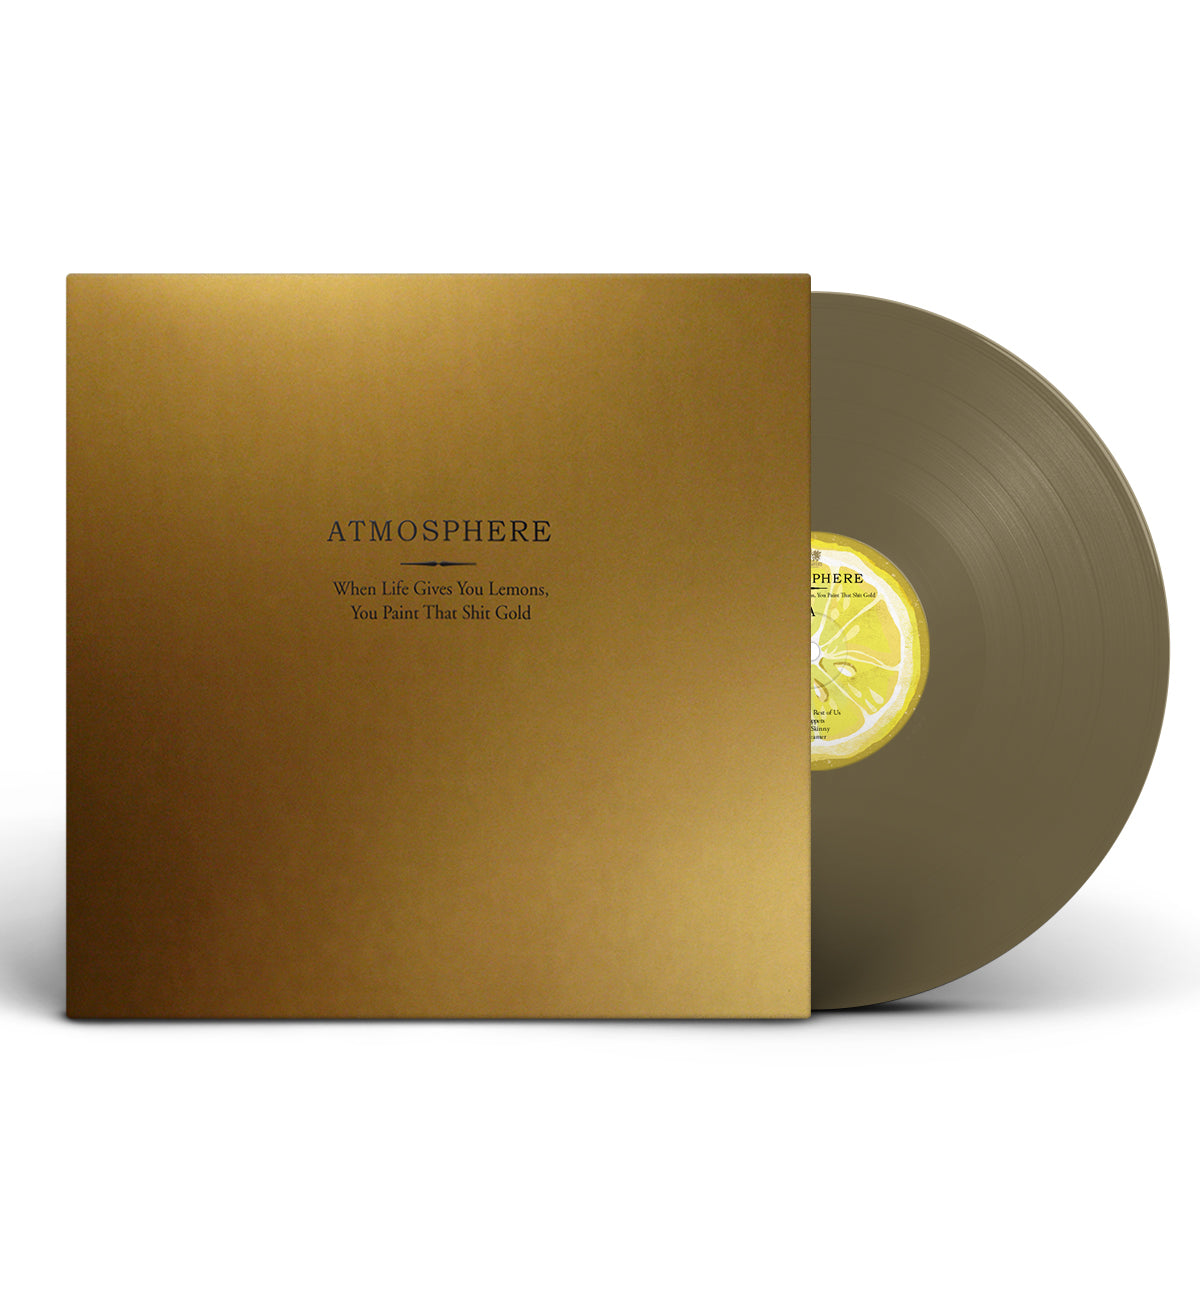 Atmosphere - When Life Gives You Lemons You Paint That Shit Gold Vinyl